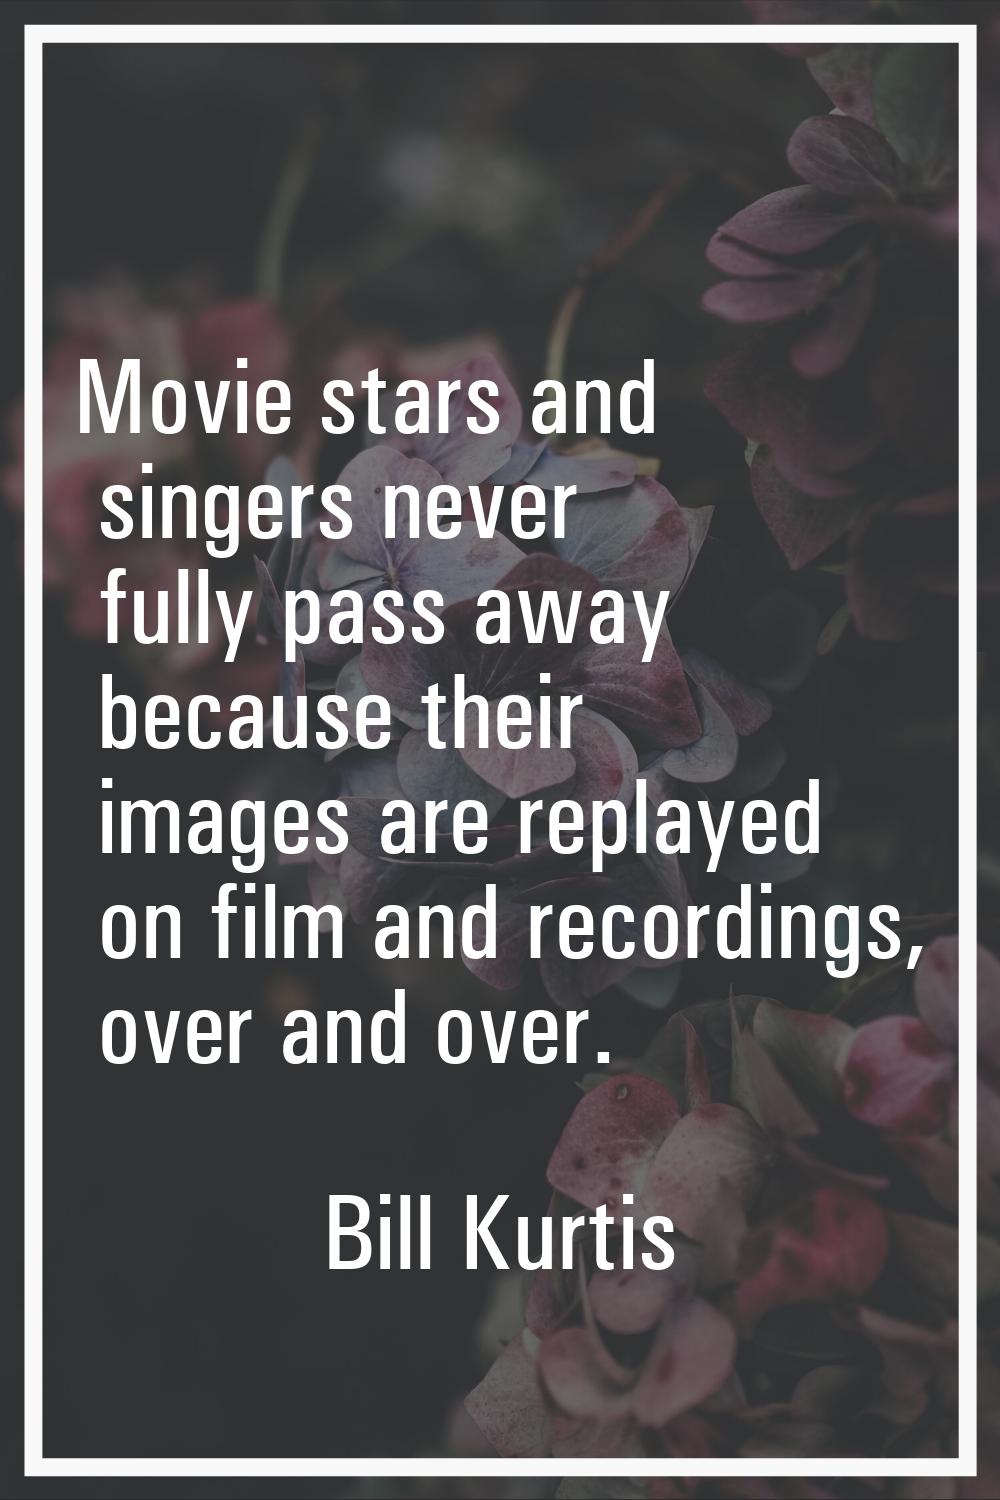 Movie stars and singers never fully pass away because their images are replayed on film and recordi